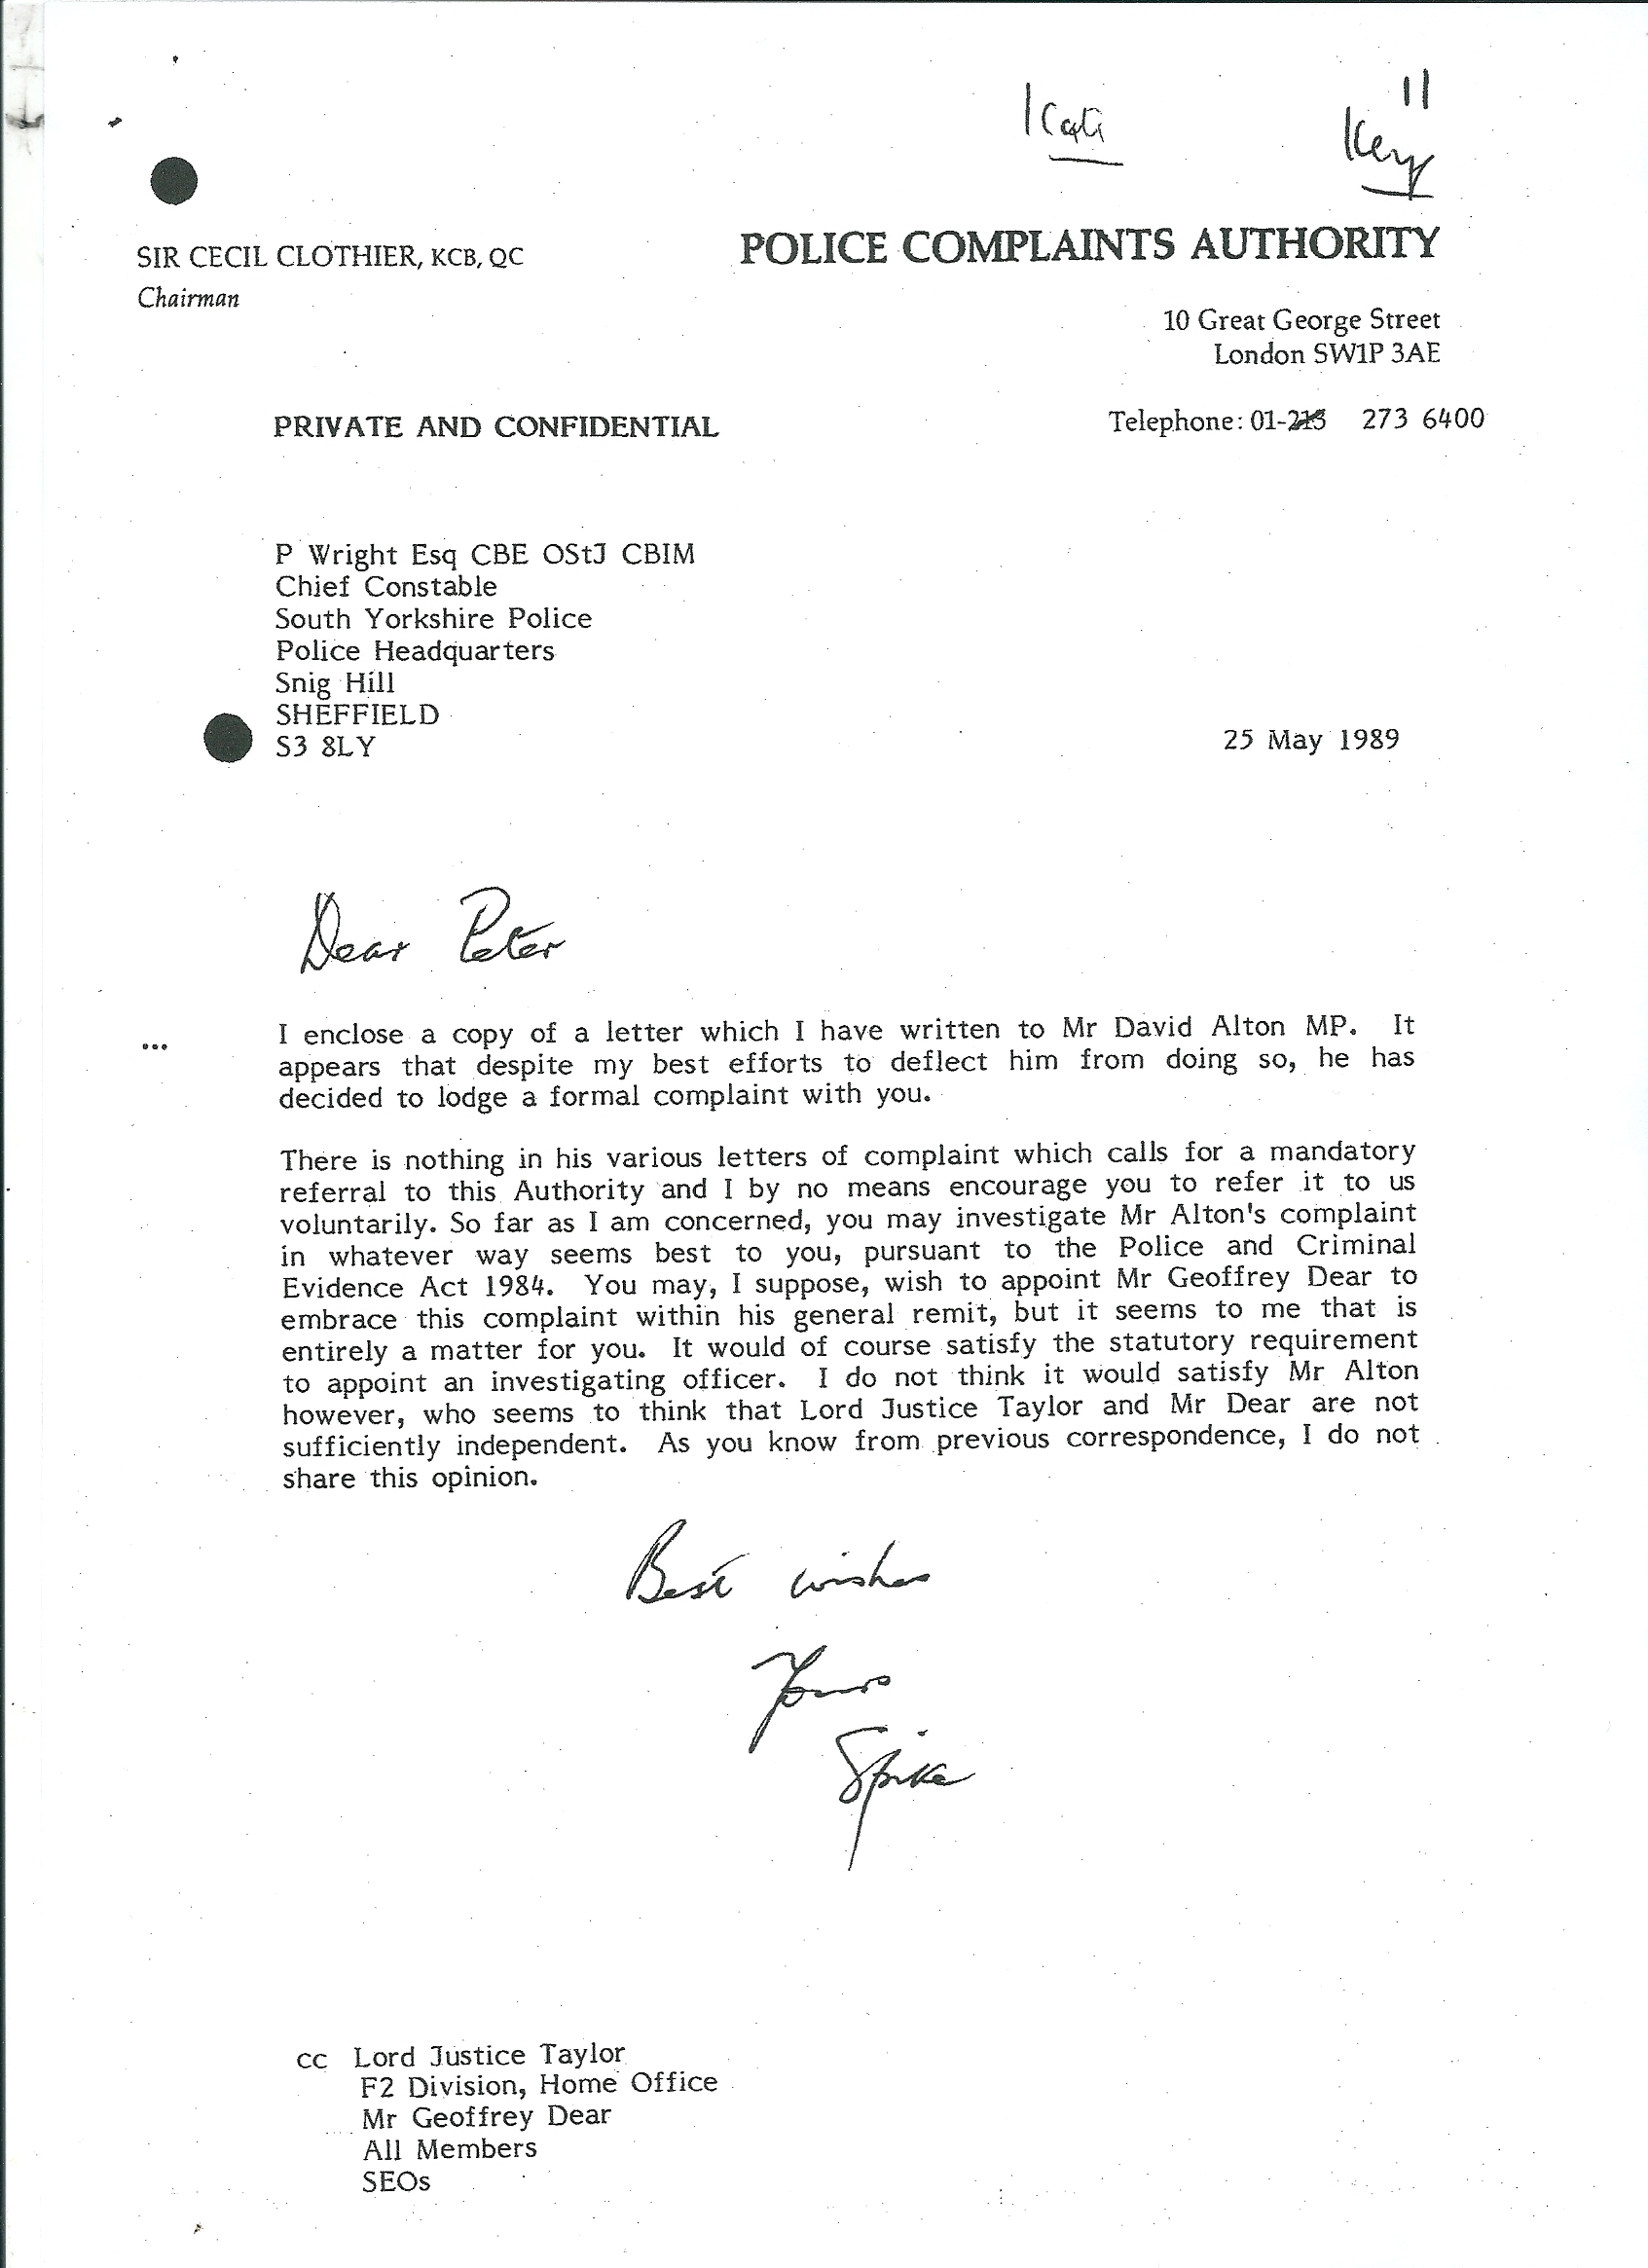 Letter from the Chairman of the Police Complaints Authority to the Chief Constable of South Yorkshire saying he had done his best to "deflect" the complaint. Sir Cecil signs the letter  "Spike" - perhaps appropriately as it's a word used by journalists when an editors has decided to withhold a story from publication. 